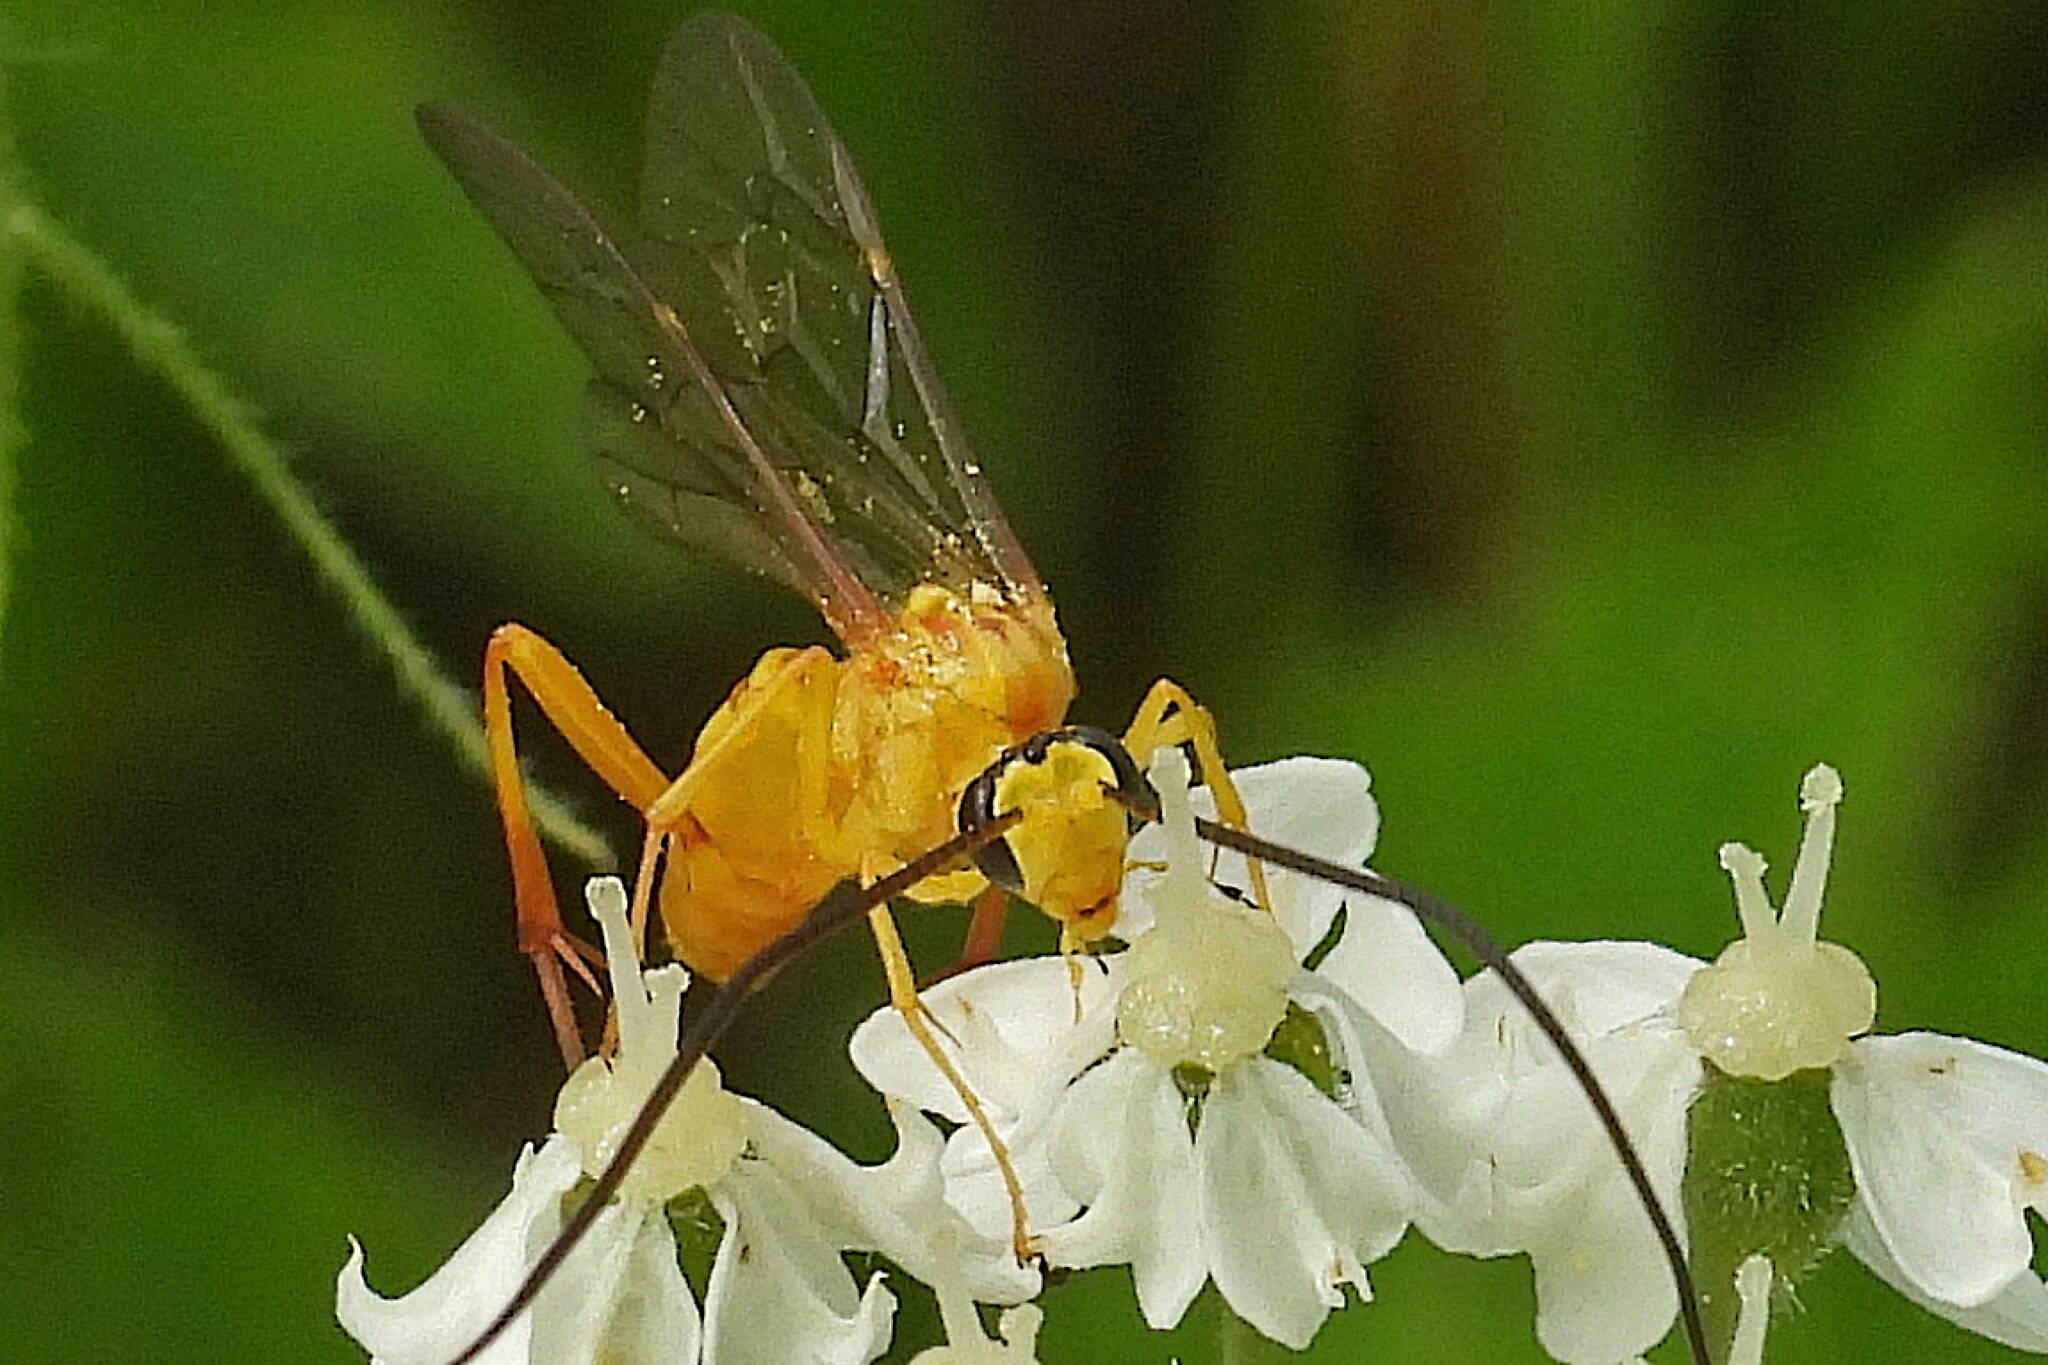 A common aerial wasp forages on cow parsnip flowers. (Photo by Bob Armstrong)